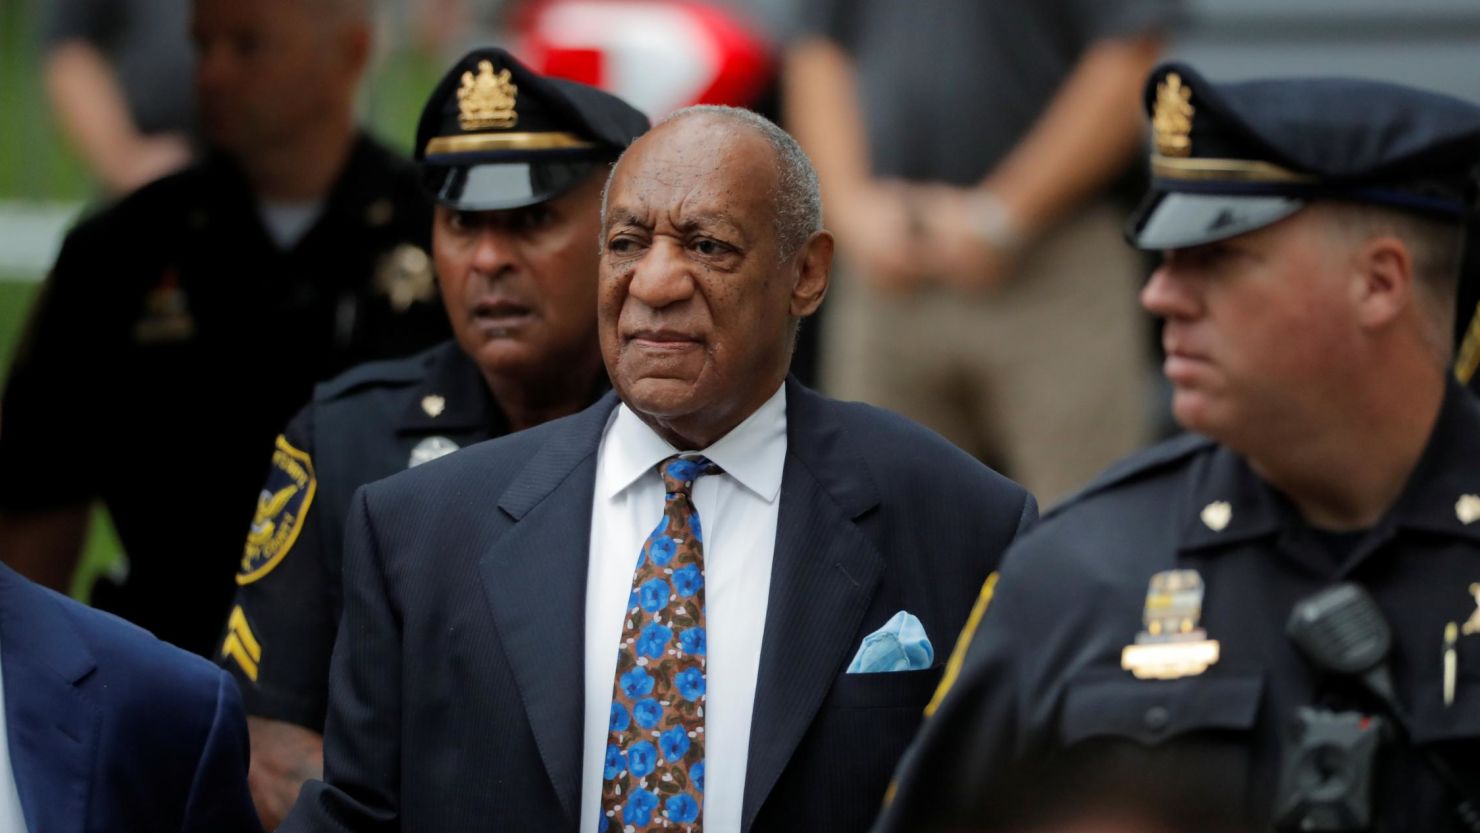 Bill Cosby arrives at the Montgomery County Courthouse for sentencing in his sexual assault trial in Norristown, Pennsylvania, September 24, 2018.